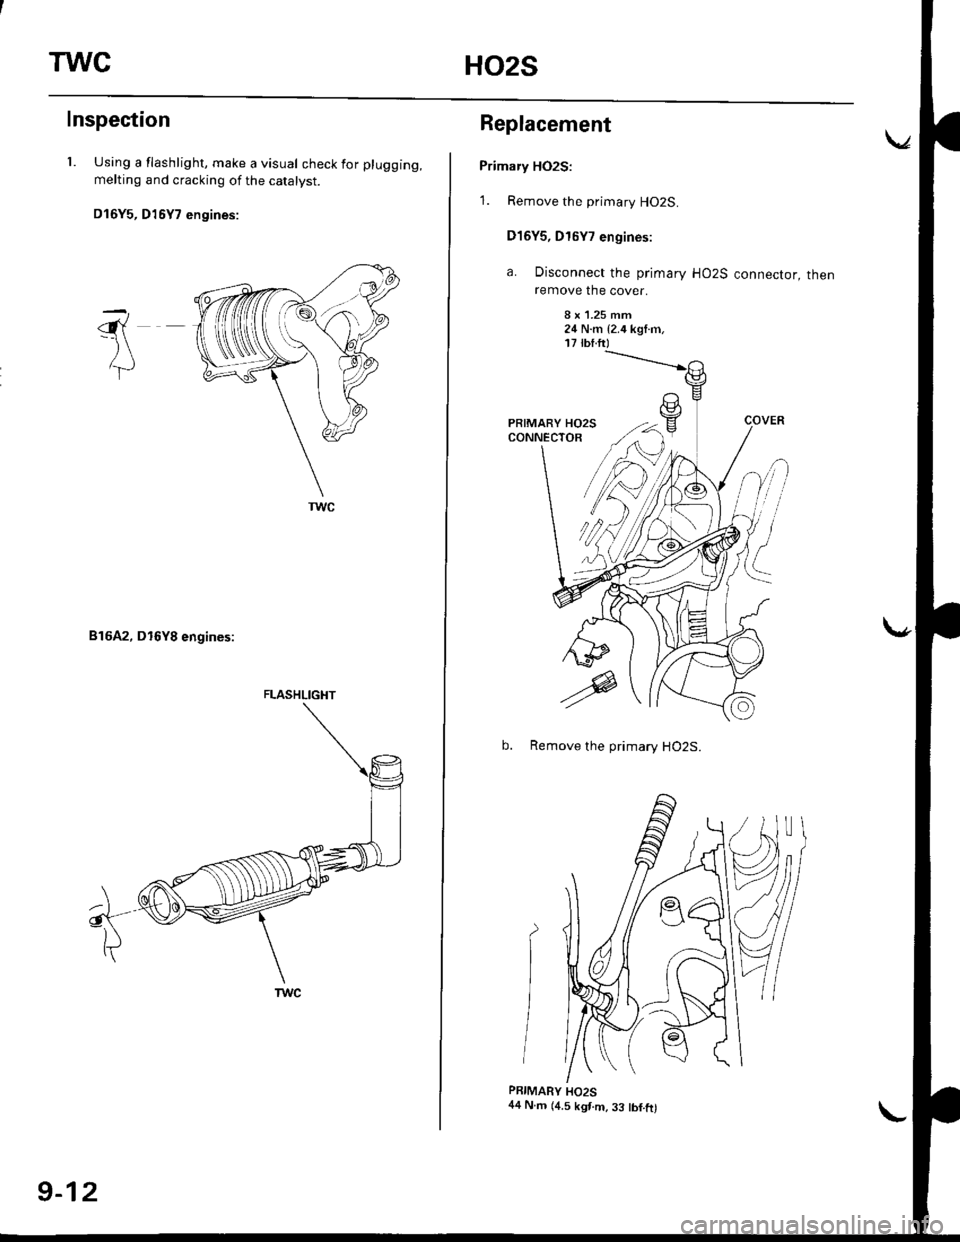 HONDA CIVIC 1999 6.G Workshop Manual TWCHO2S
Inspection
l. Using a flashlight, make a visual check for plugging,
melting and cracking of the catalyst.
D16Y5, D16Y7 engines:
816A2, D16Y8 engines:
-\6{-)\
lT
a
A
FLASHLIGI{T
9-12
Replacemen